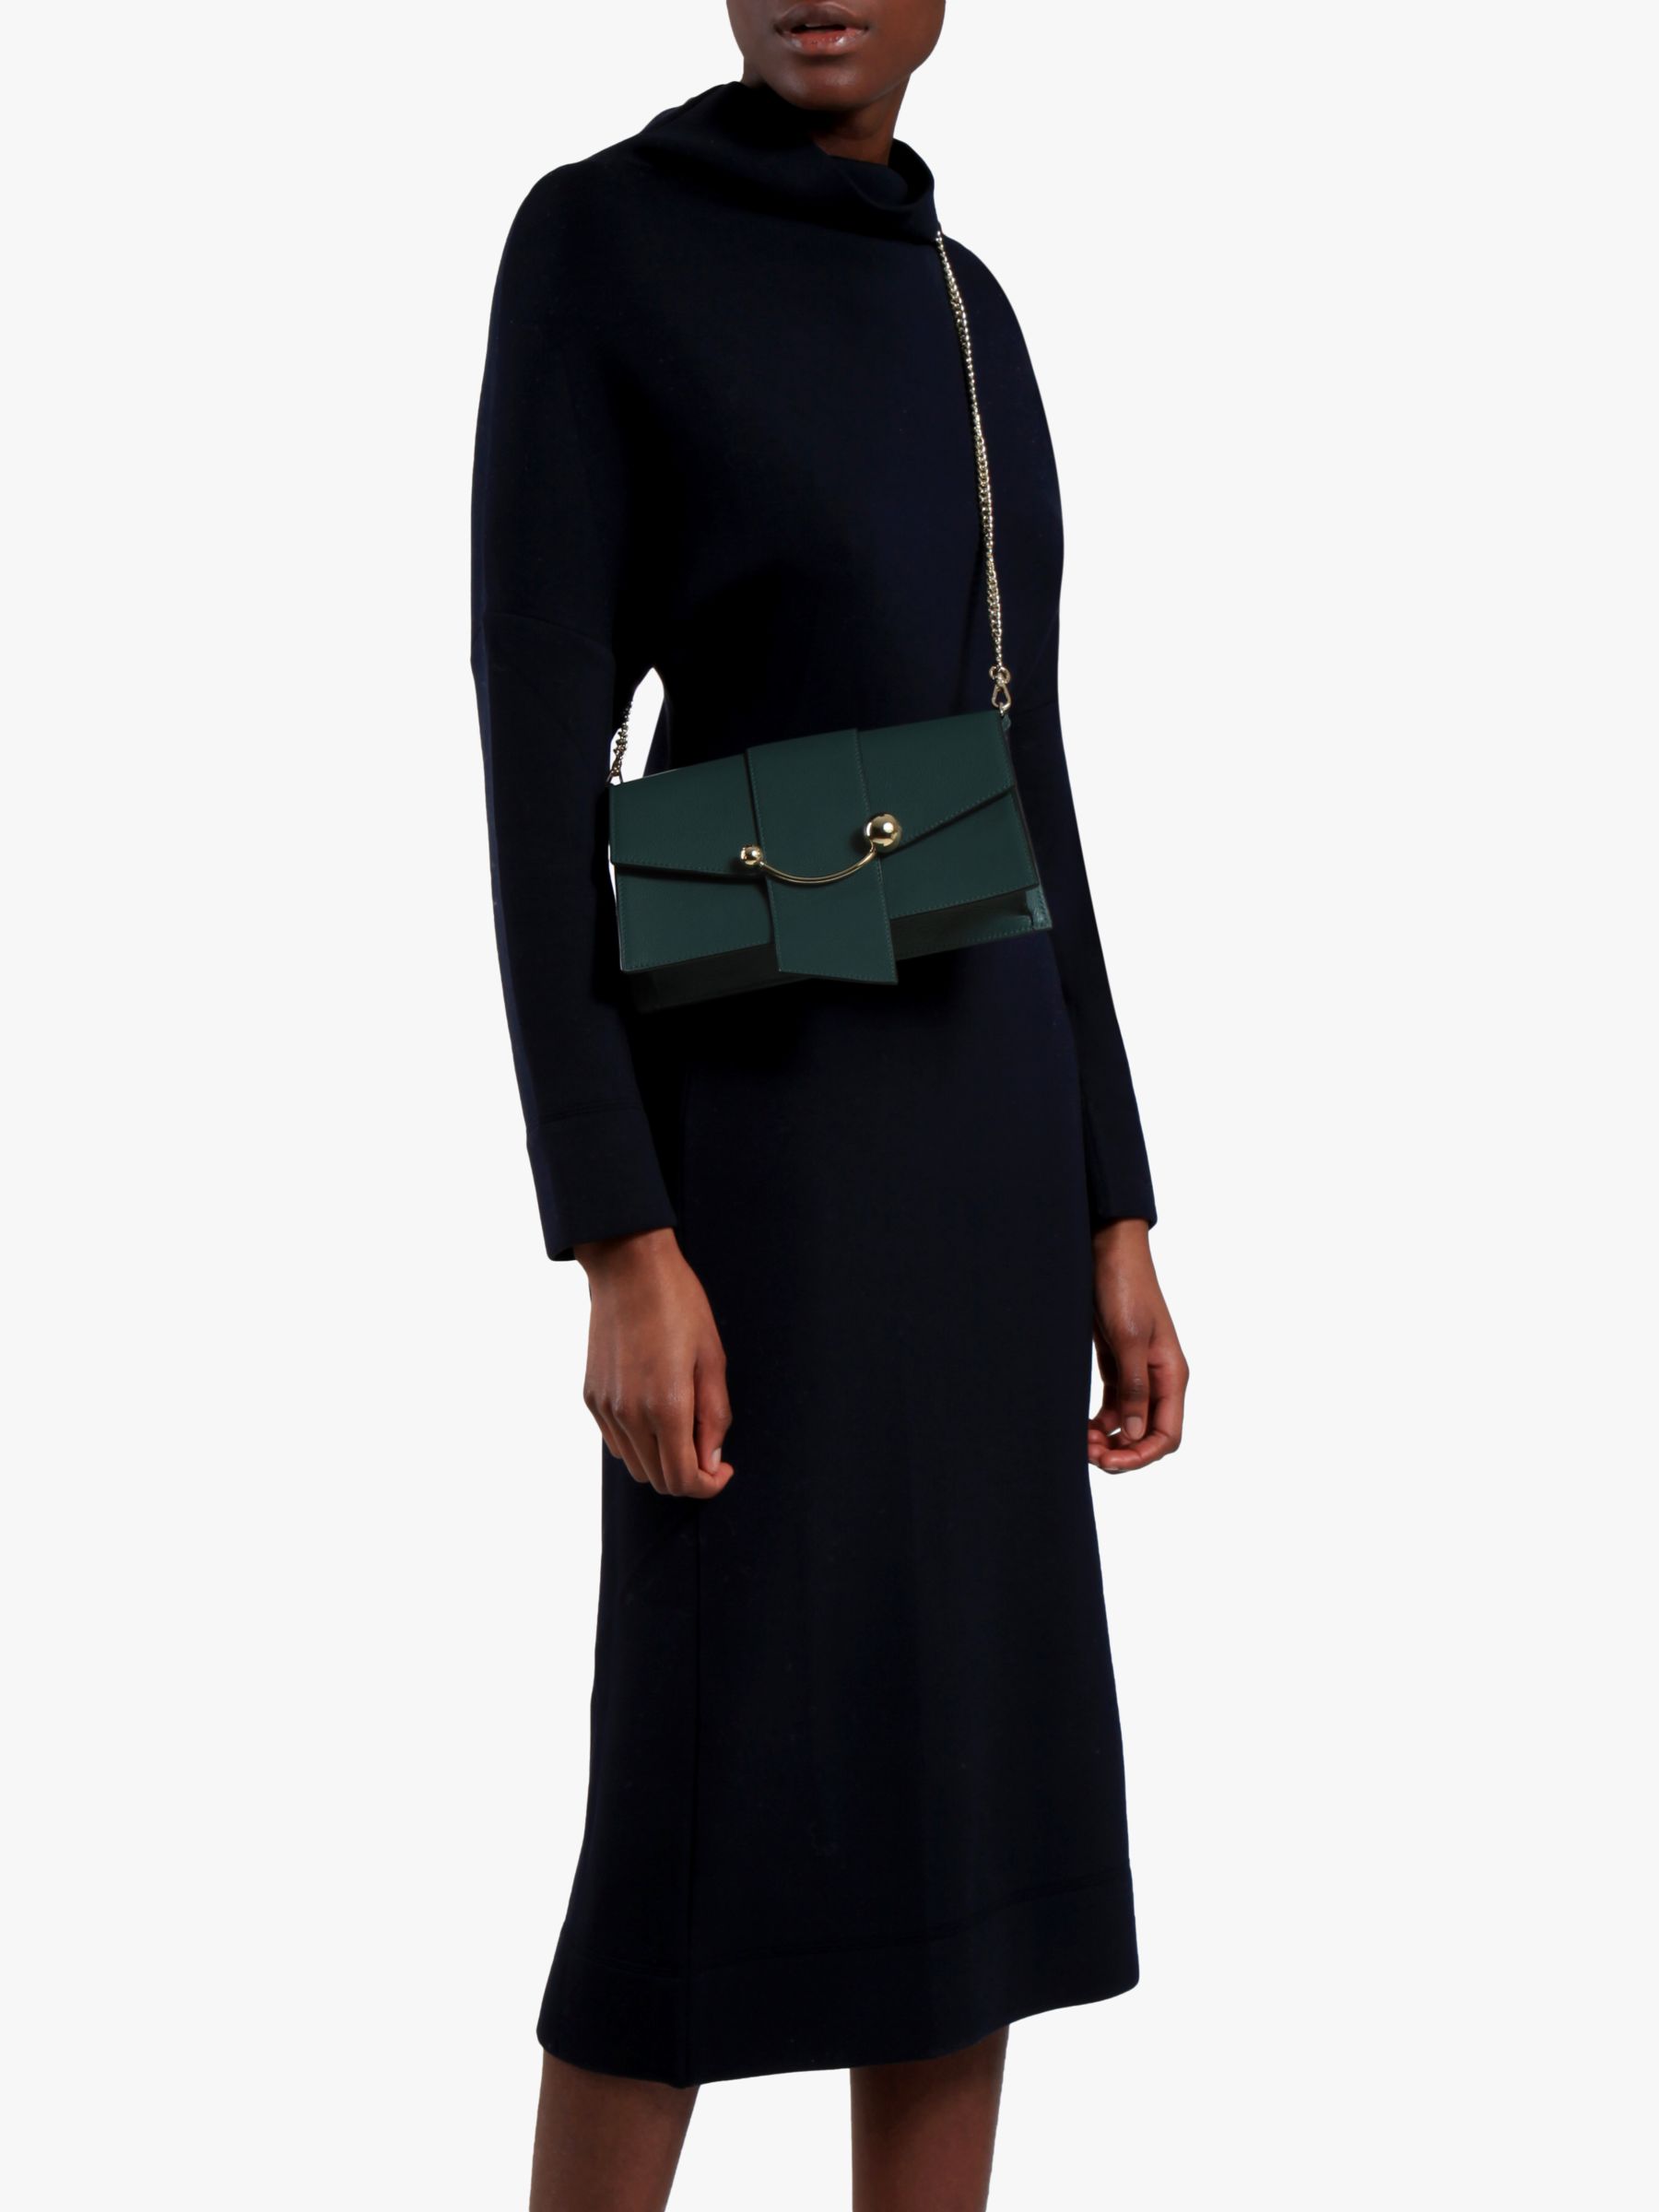 The Strathberry Crescent Shoulder Bag in Bottle Green - Fashion Should Be  Fun